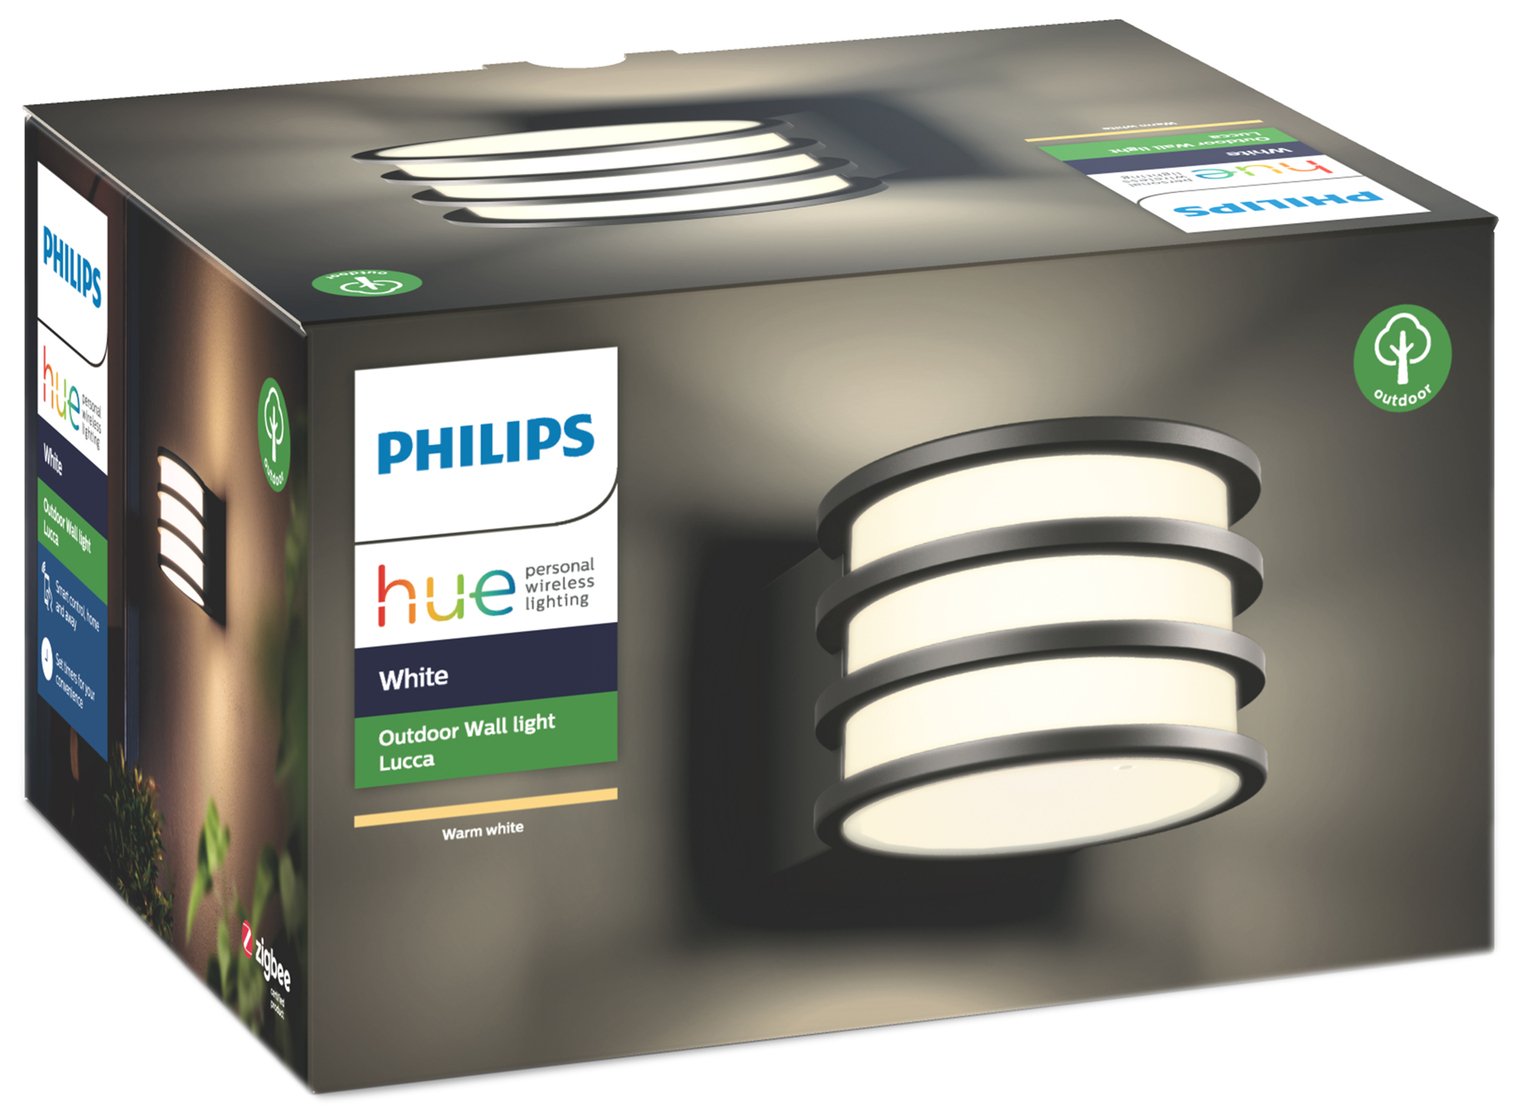 Philips Hue Lucca Outdoor Wall Light Review